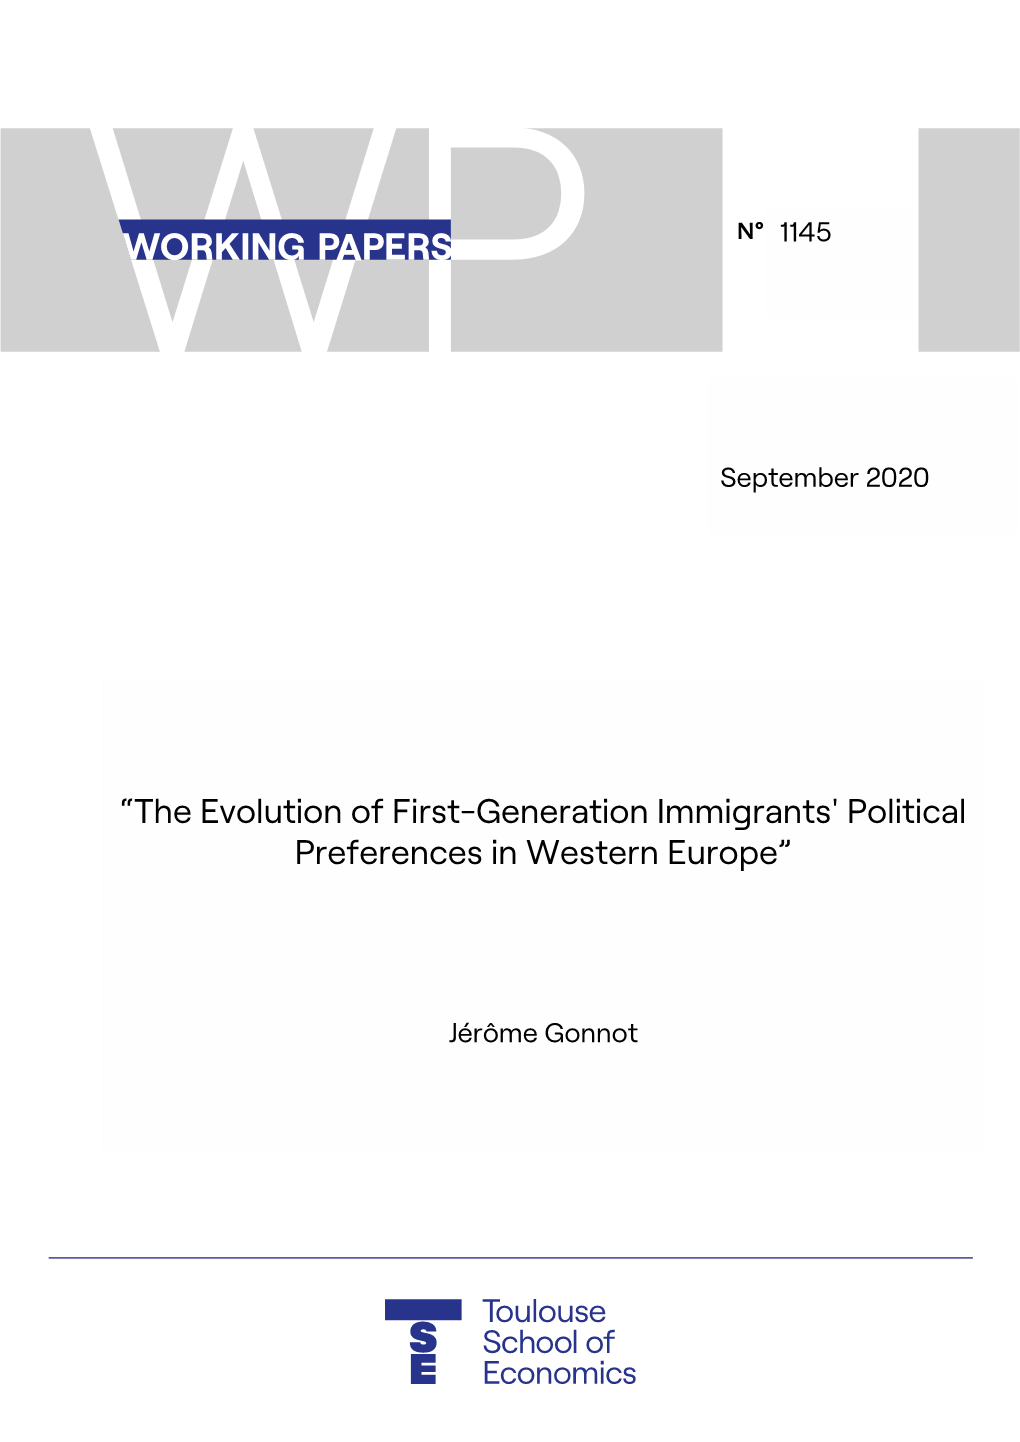 “The Evolution of First-Generation Immigrants' Political Preferences in Western Europe”